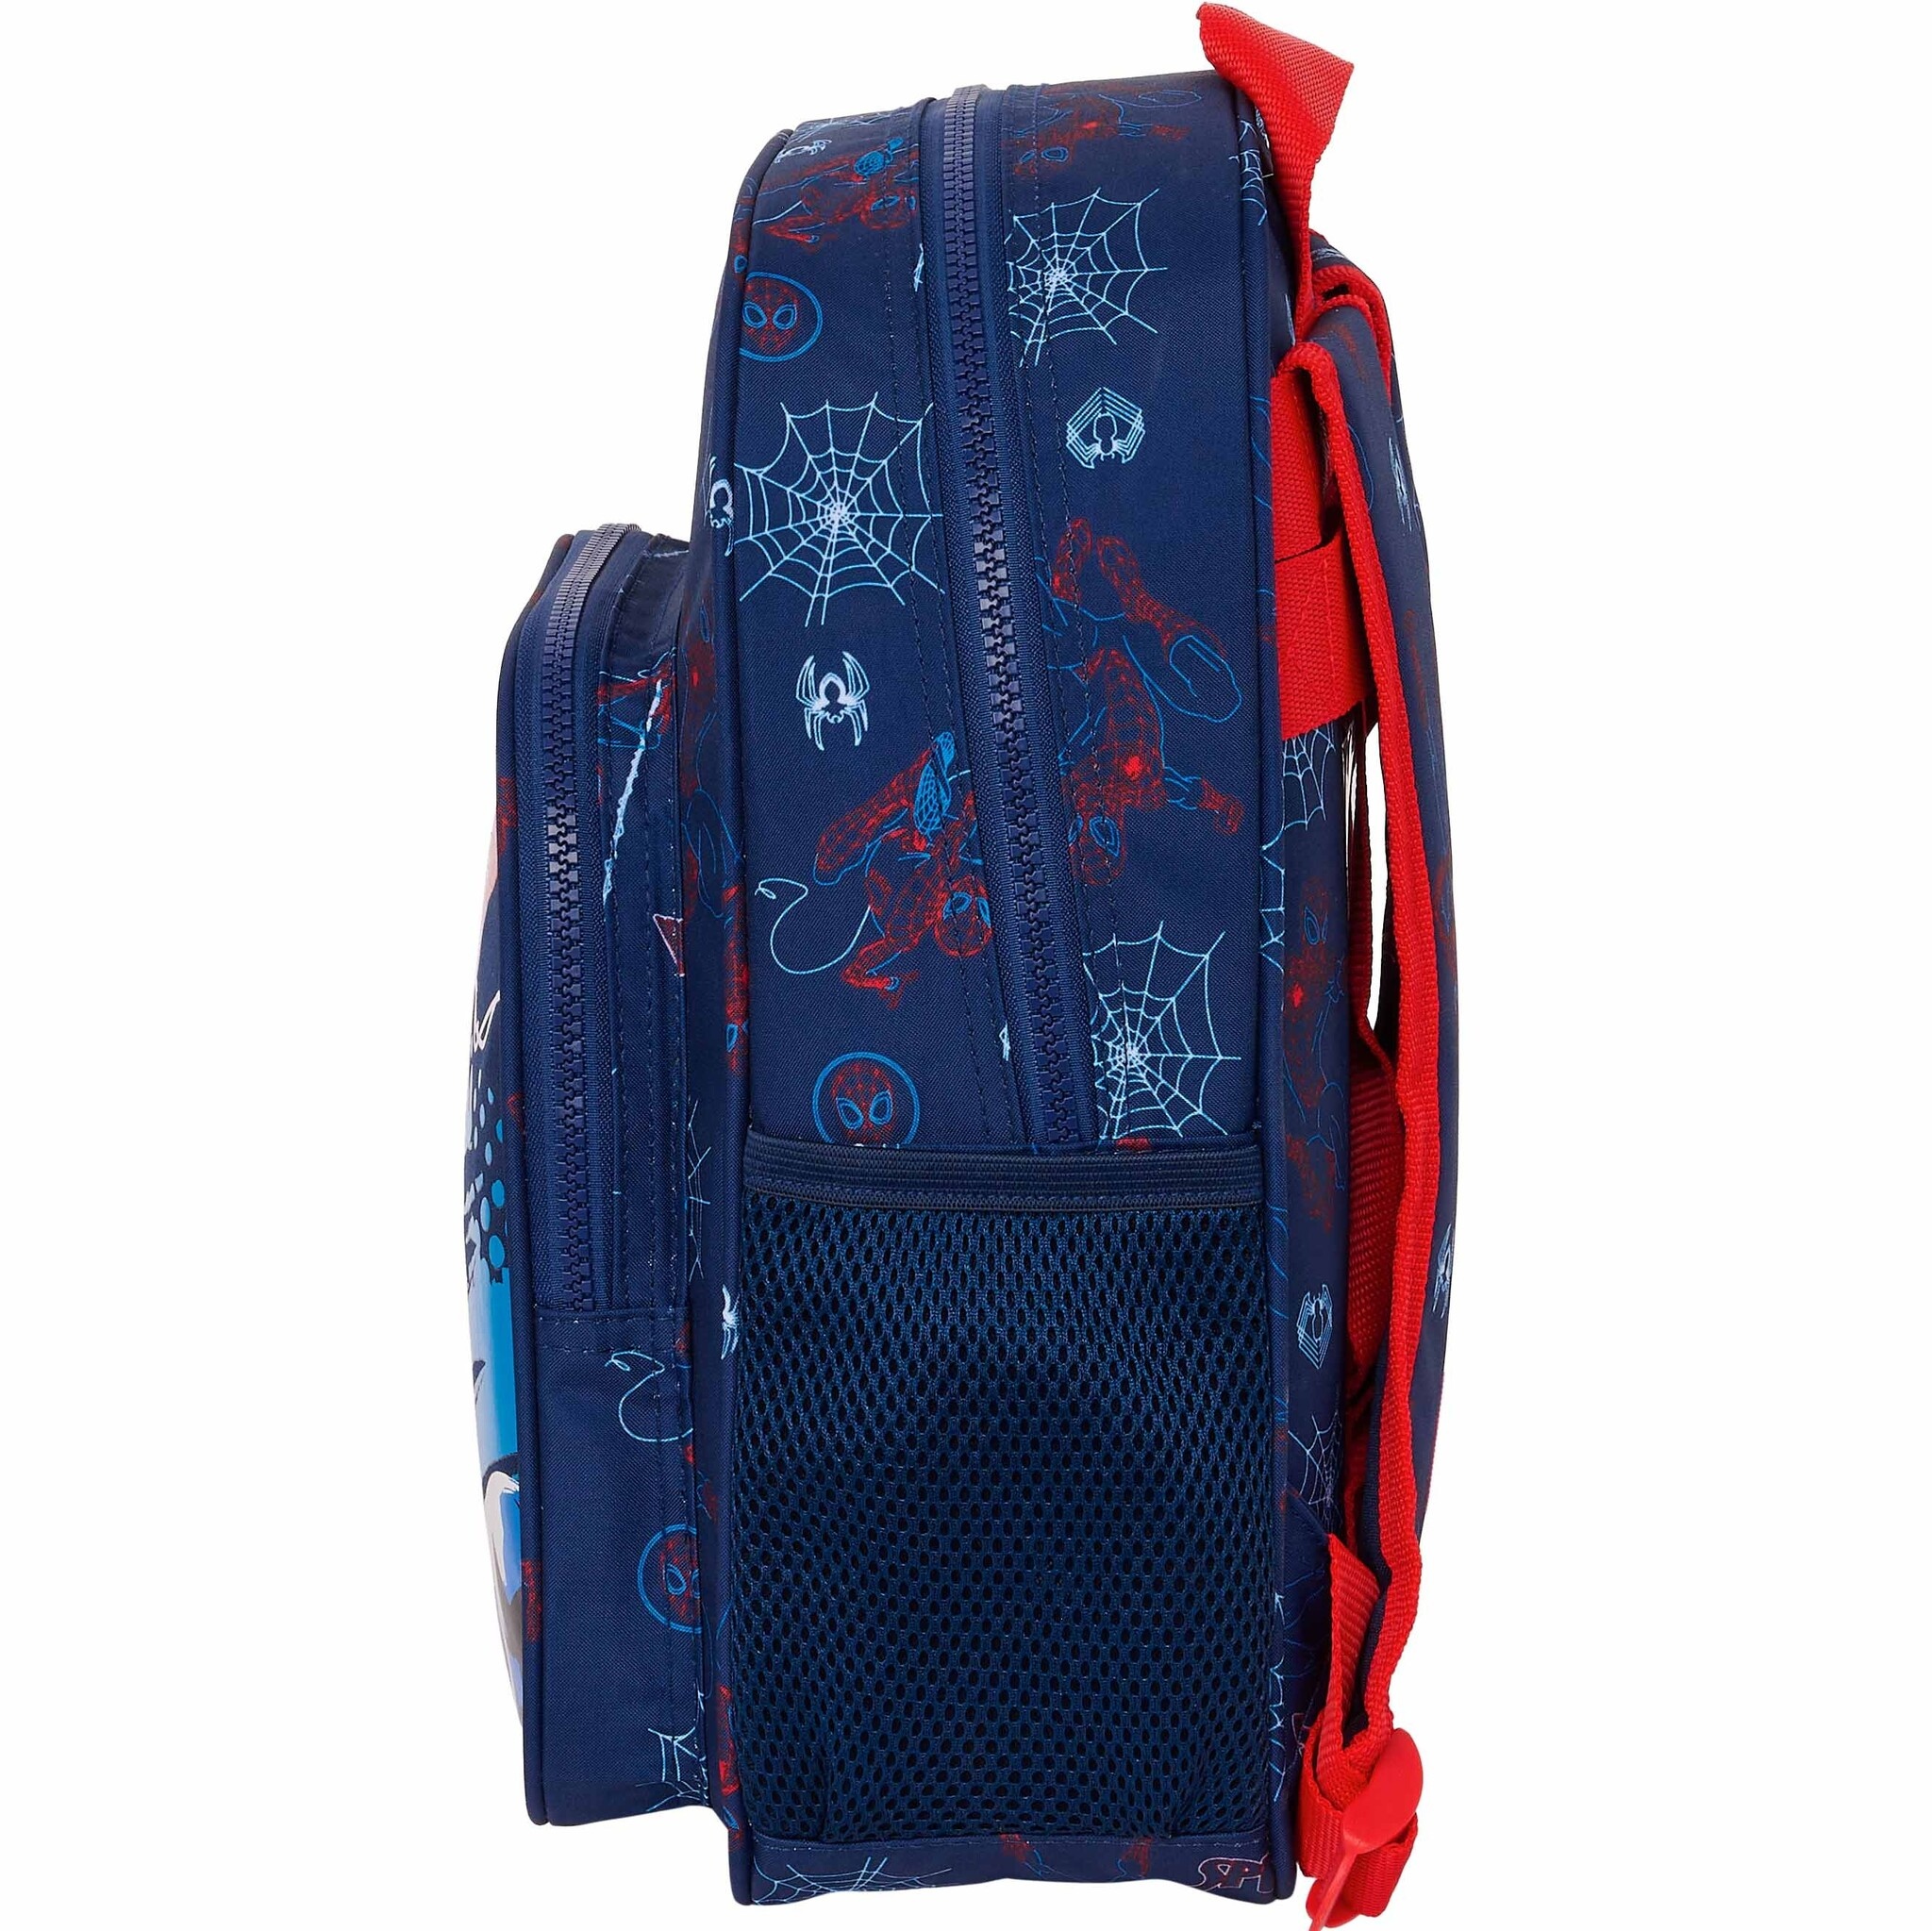 Spiderman Backpack, Web - 34 x 26 x 11 cm - Polyester